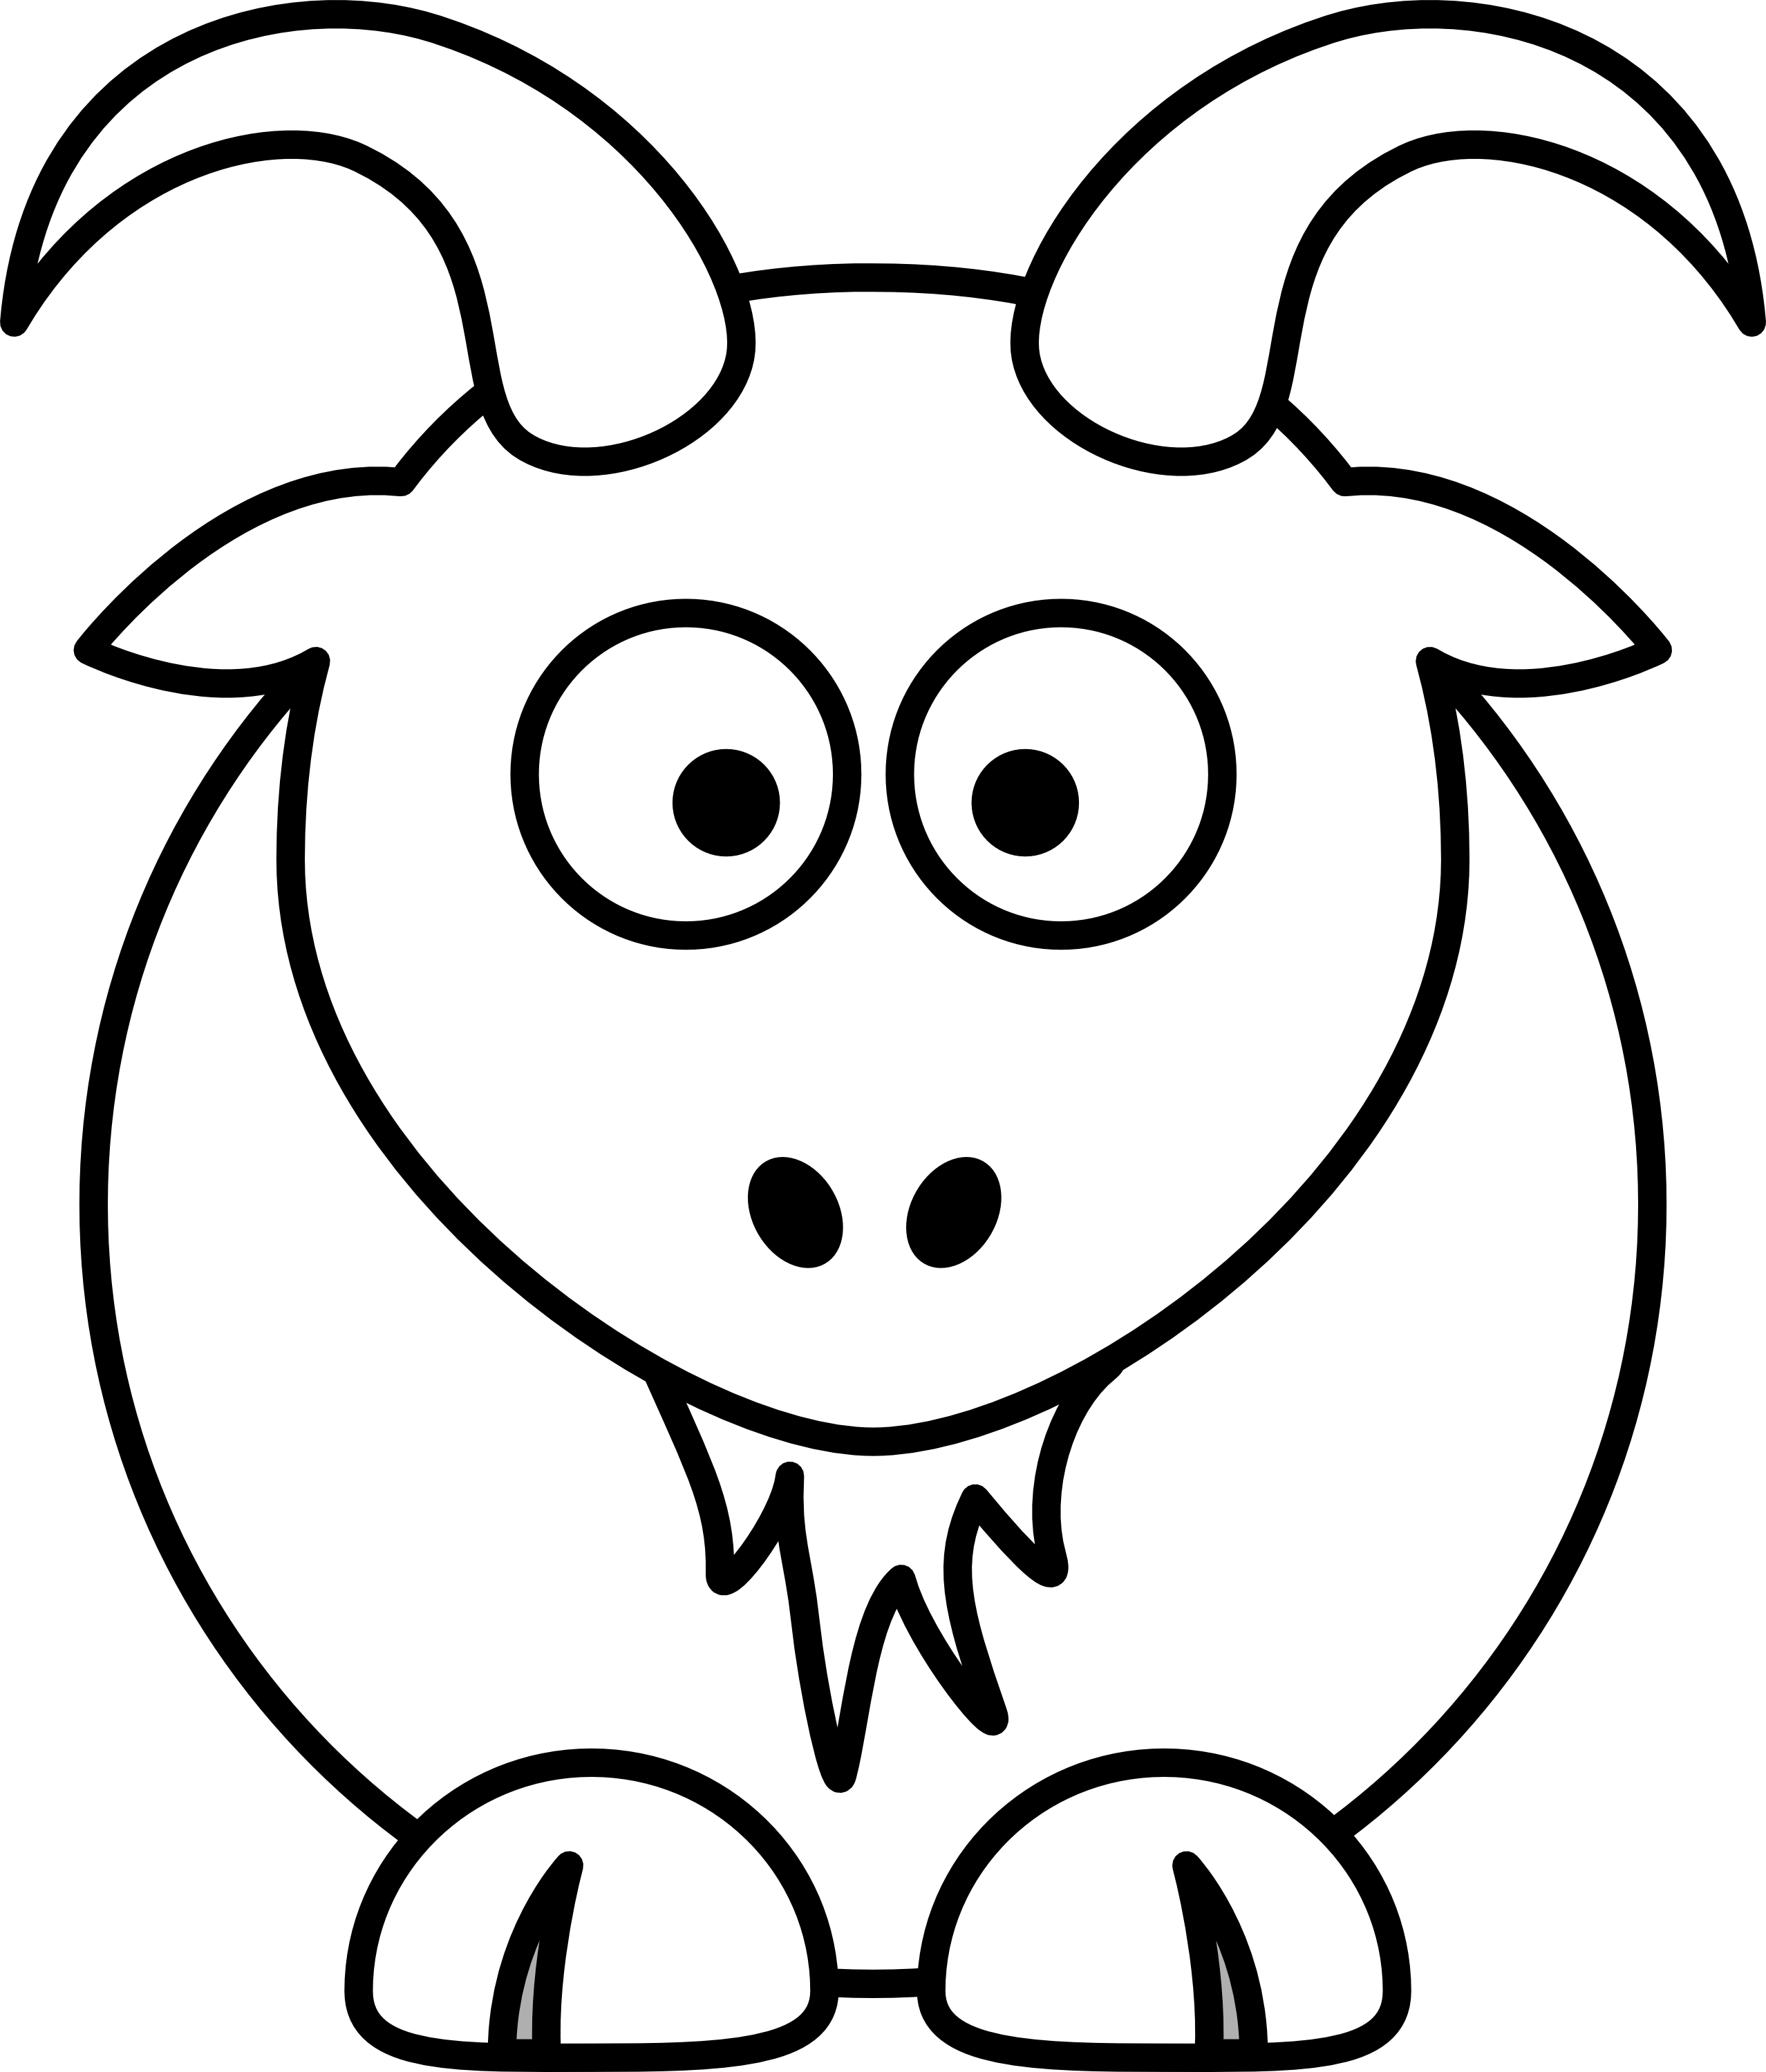 Goat black and white clipart clipart kid 3